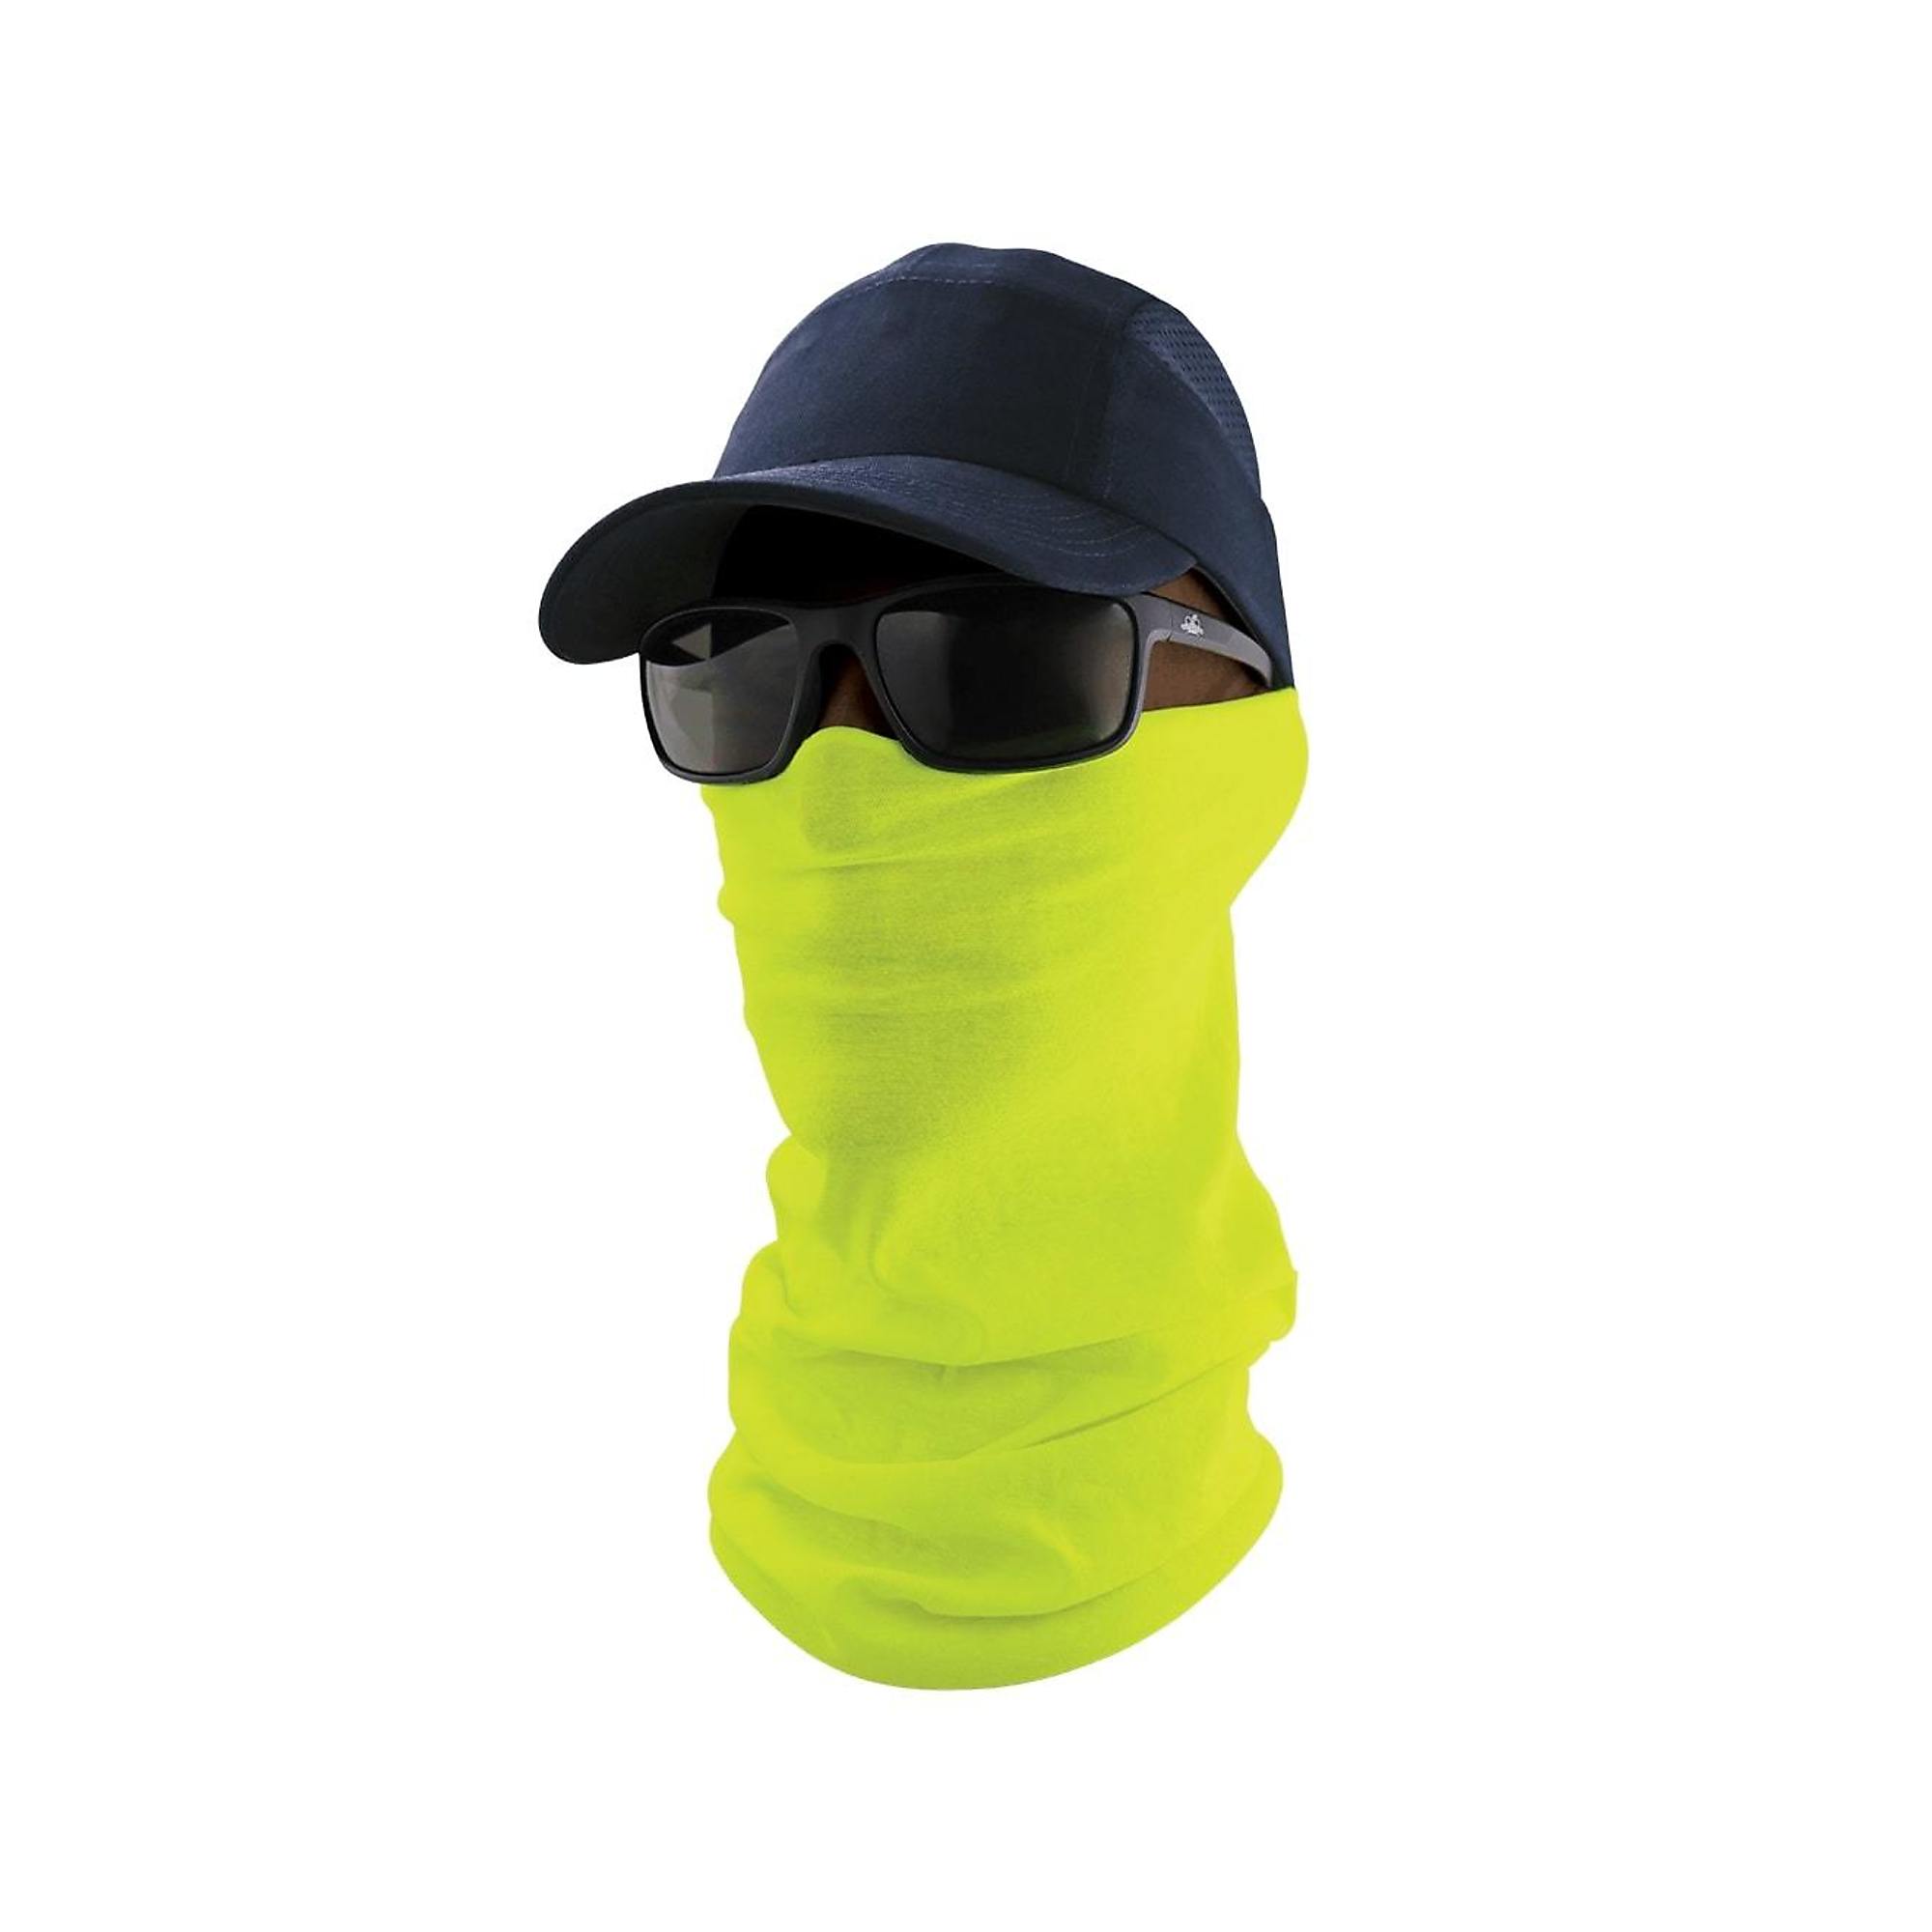 FrogWear, Hi-Vis Yellow/Green, Multi-Function Neck Gaiters, Size One Size, Material Polyester Spandex, Model NG-201